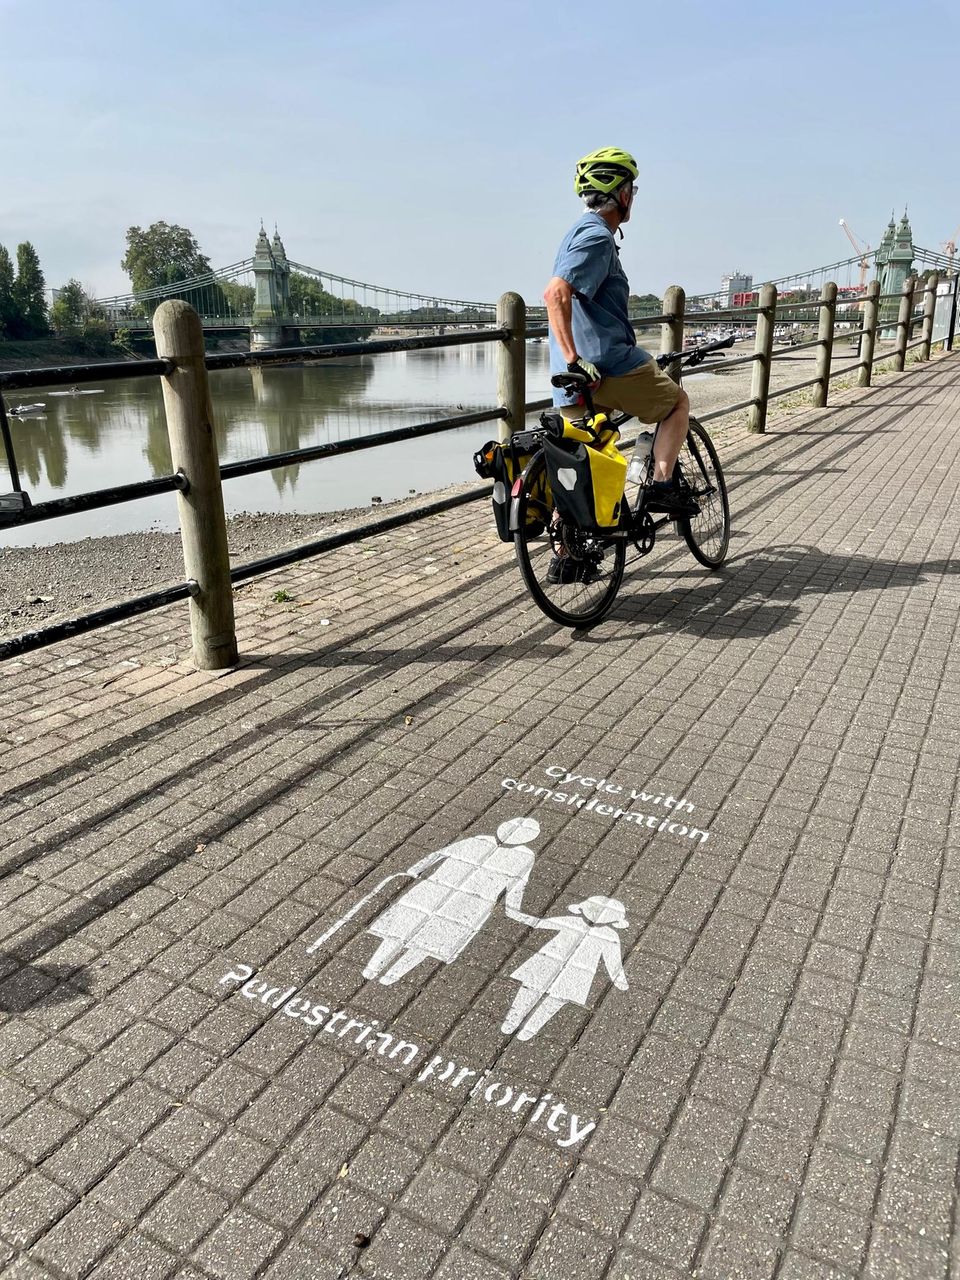 "Cycle considerately - pedestrians have priority here" stands on the Thames Path, which is shared by pedestrians and cyclists in Hammersmith